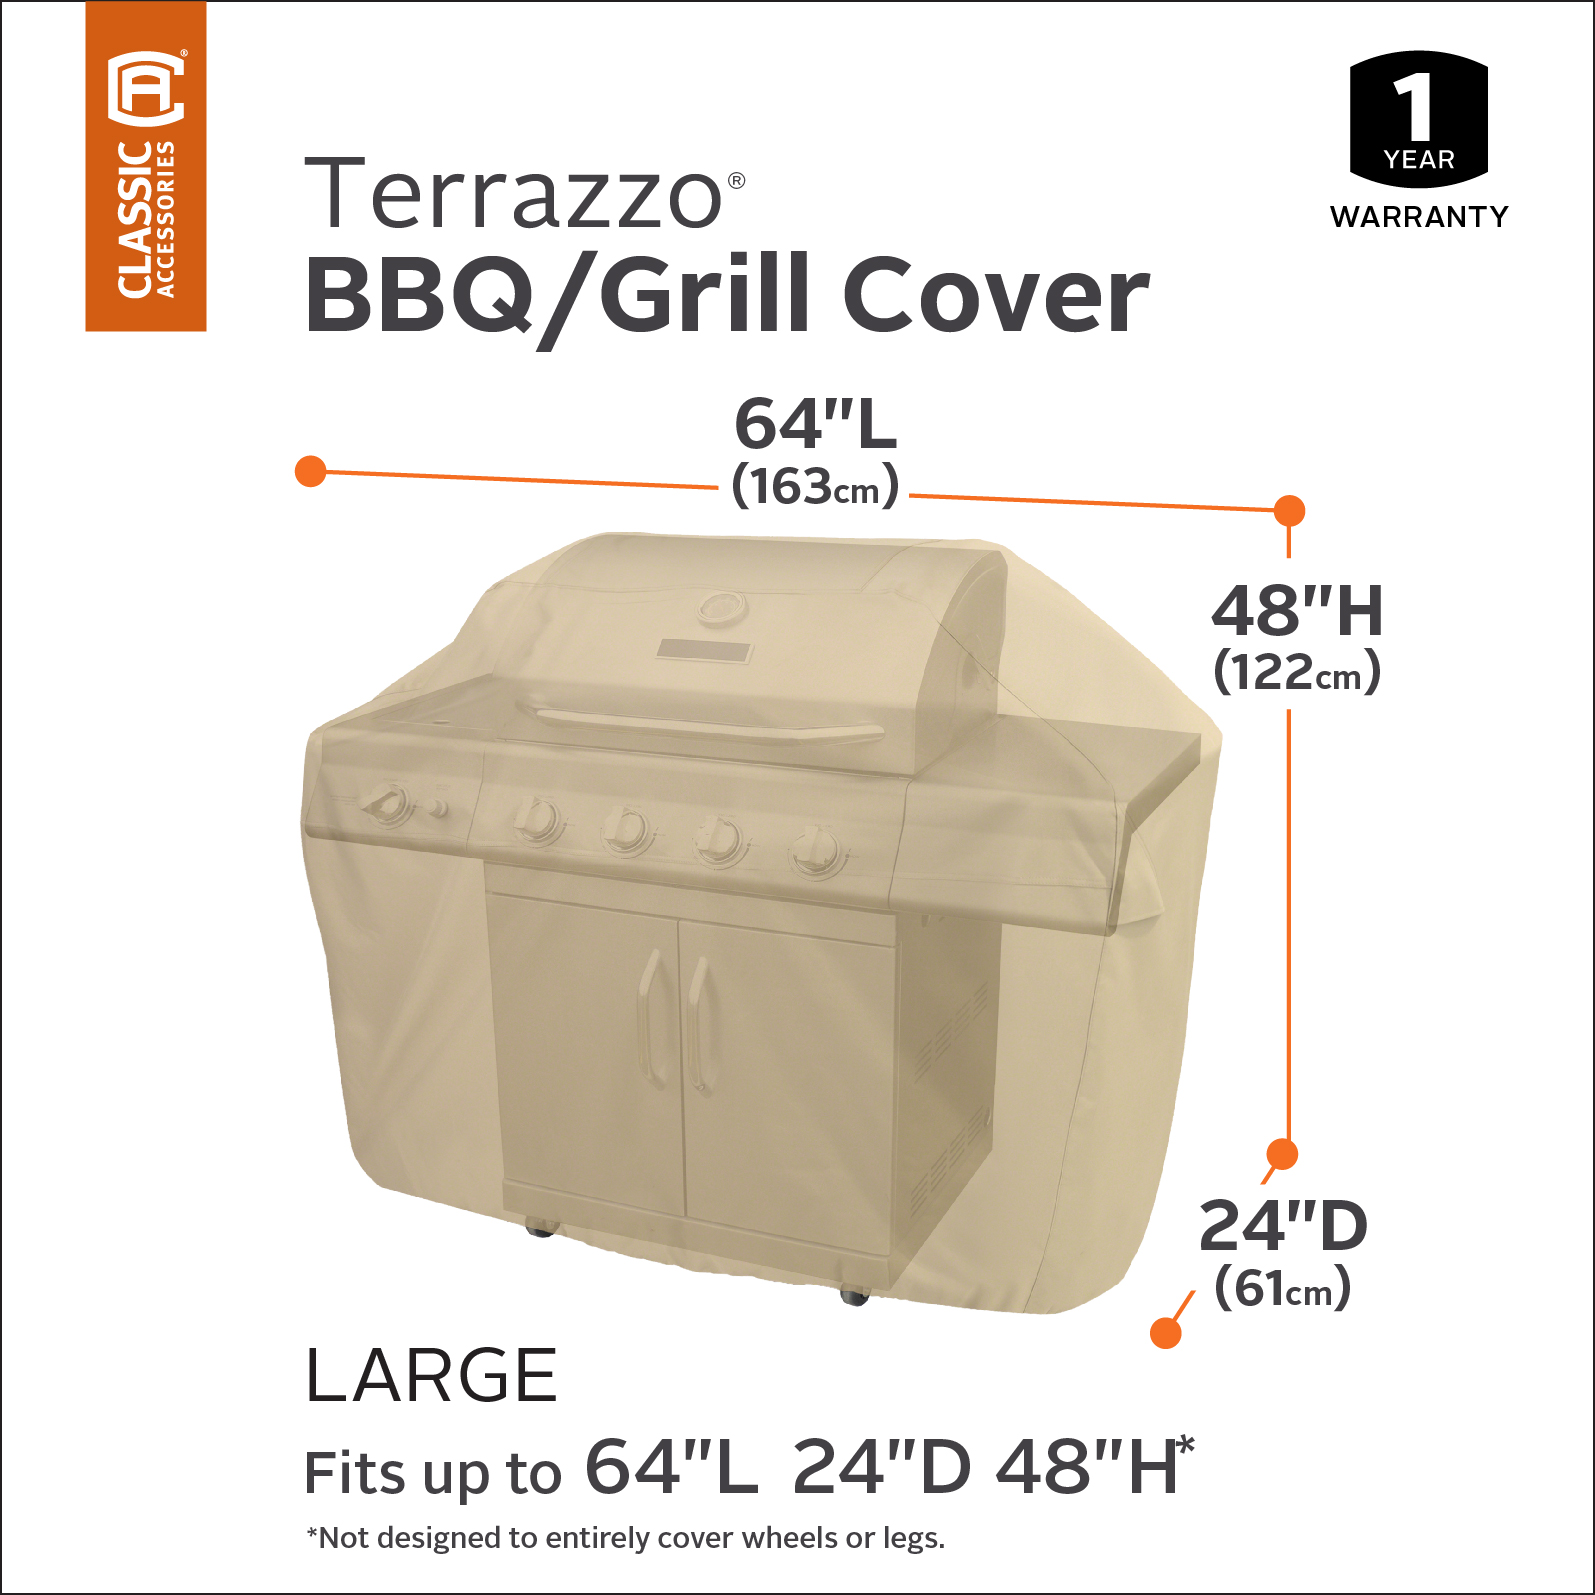 Classic Accessories Terrazzo Barbecue BBQ Grill Patio Storage Cover, Up to 64" Wide, Large - image 2 of 8